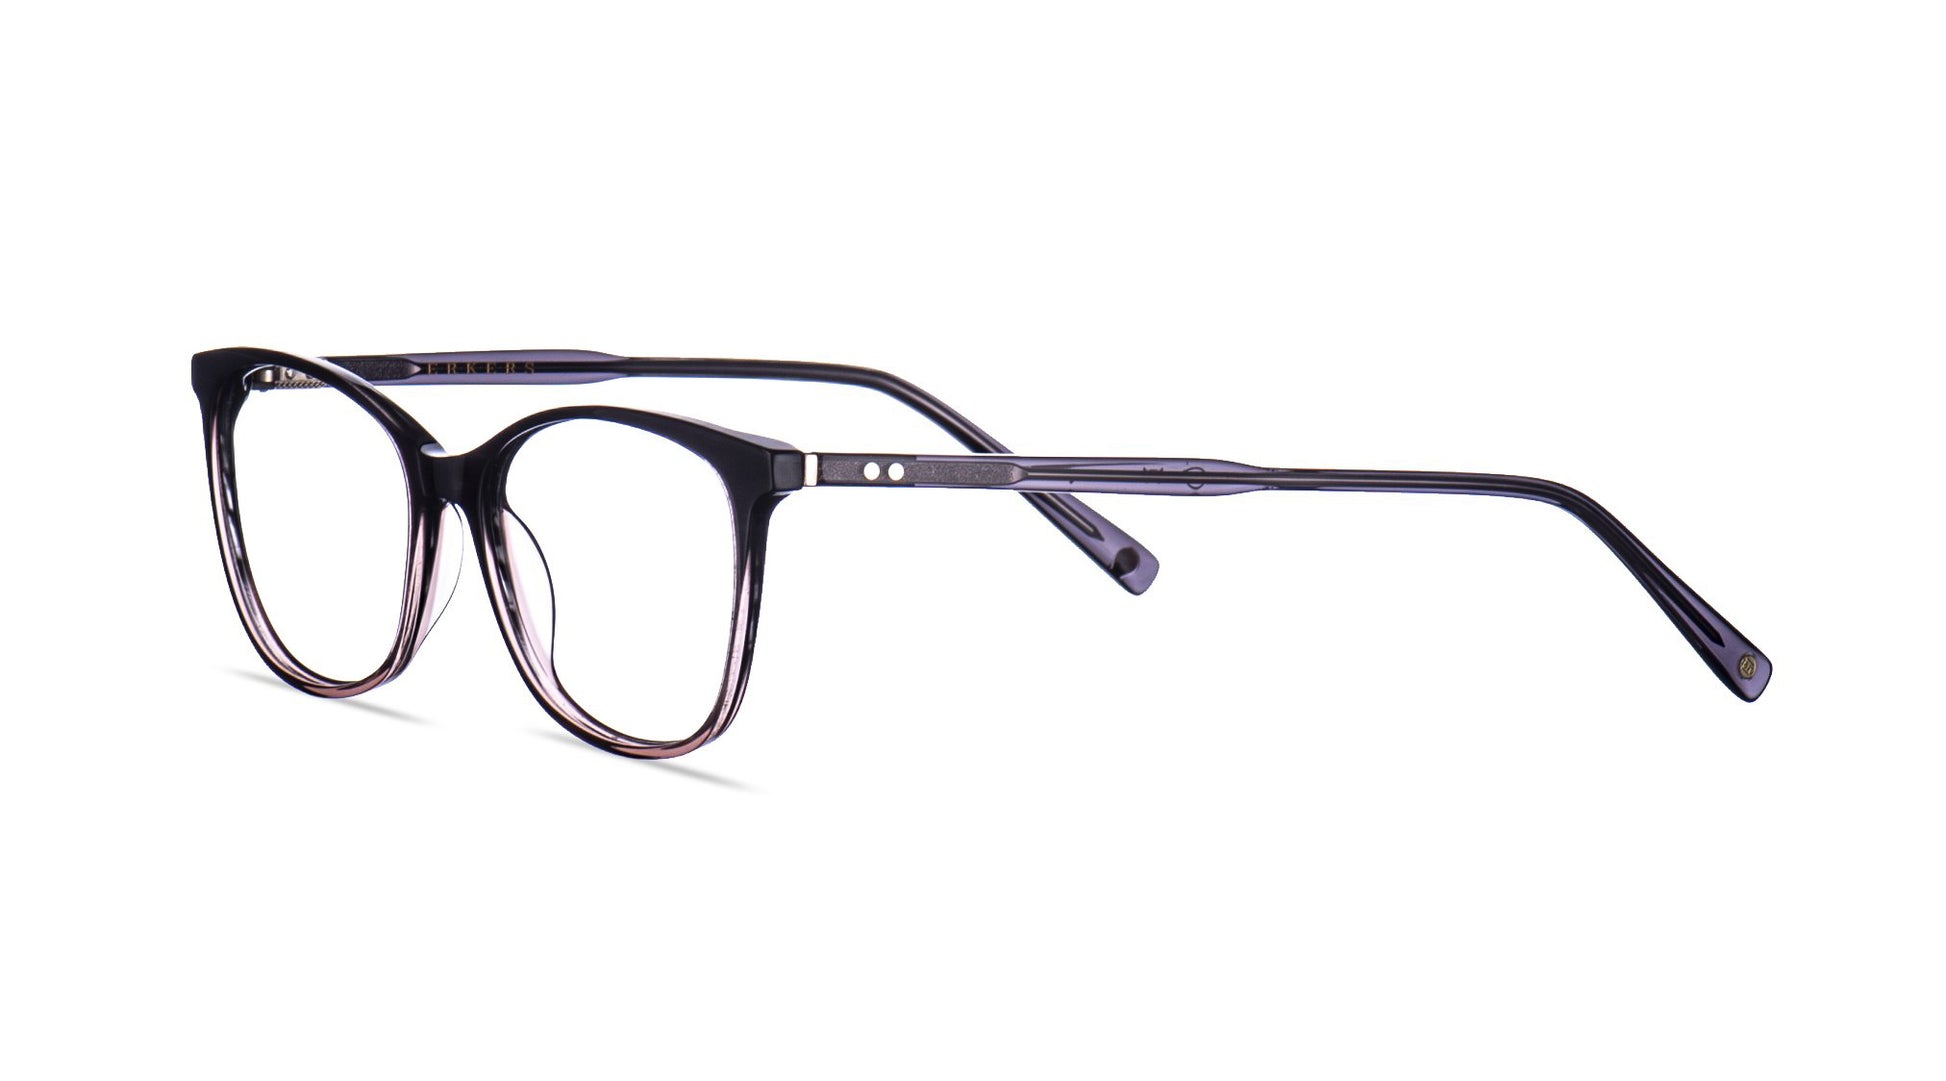 Made using a special process to allow a extremely thin, lightweight frame yet extremely durable. A feminine frame with a soft upsweep. Timeless and beautiful.